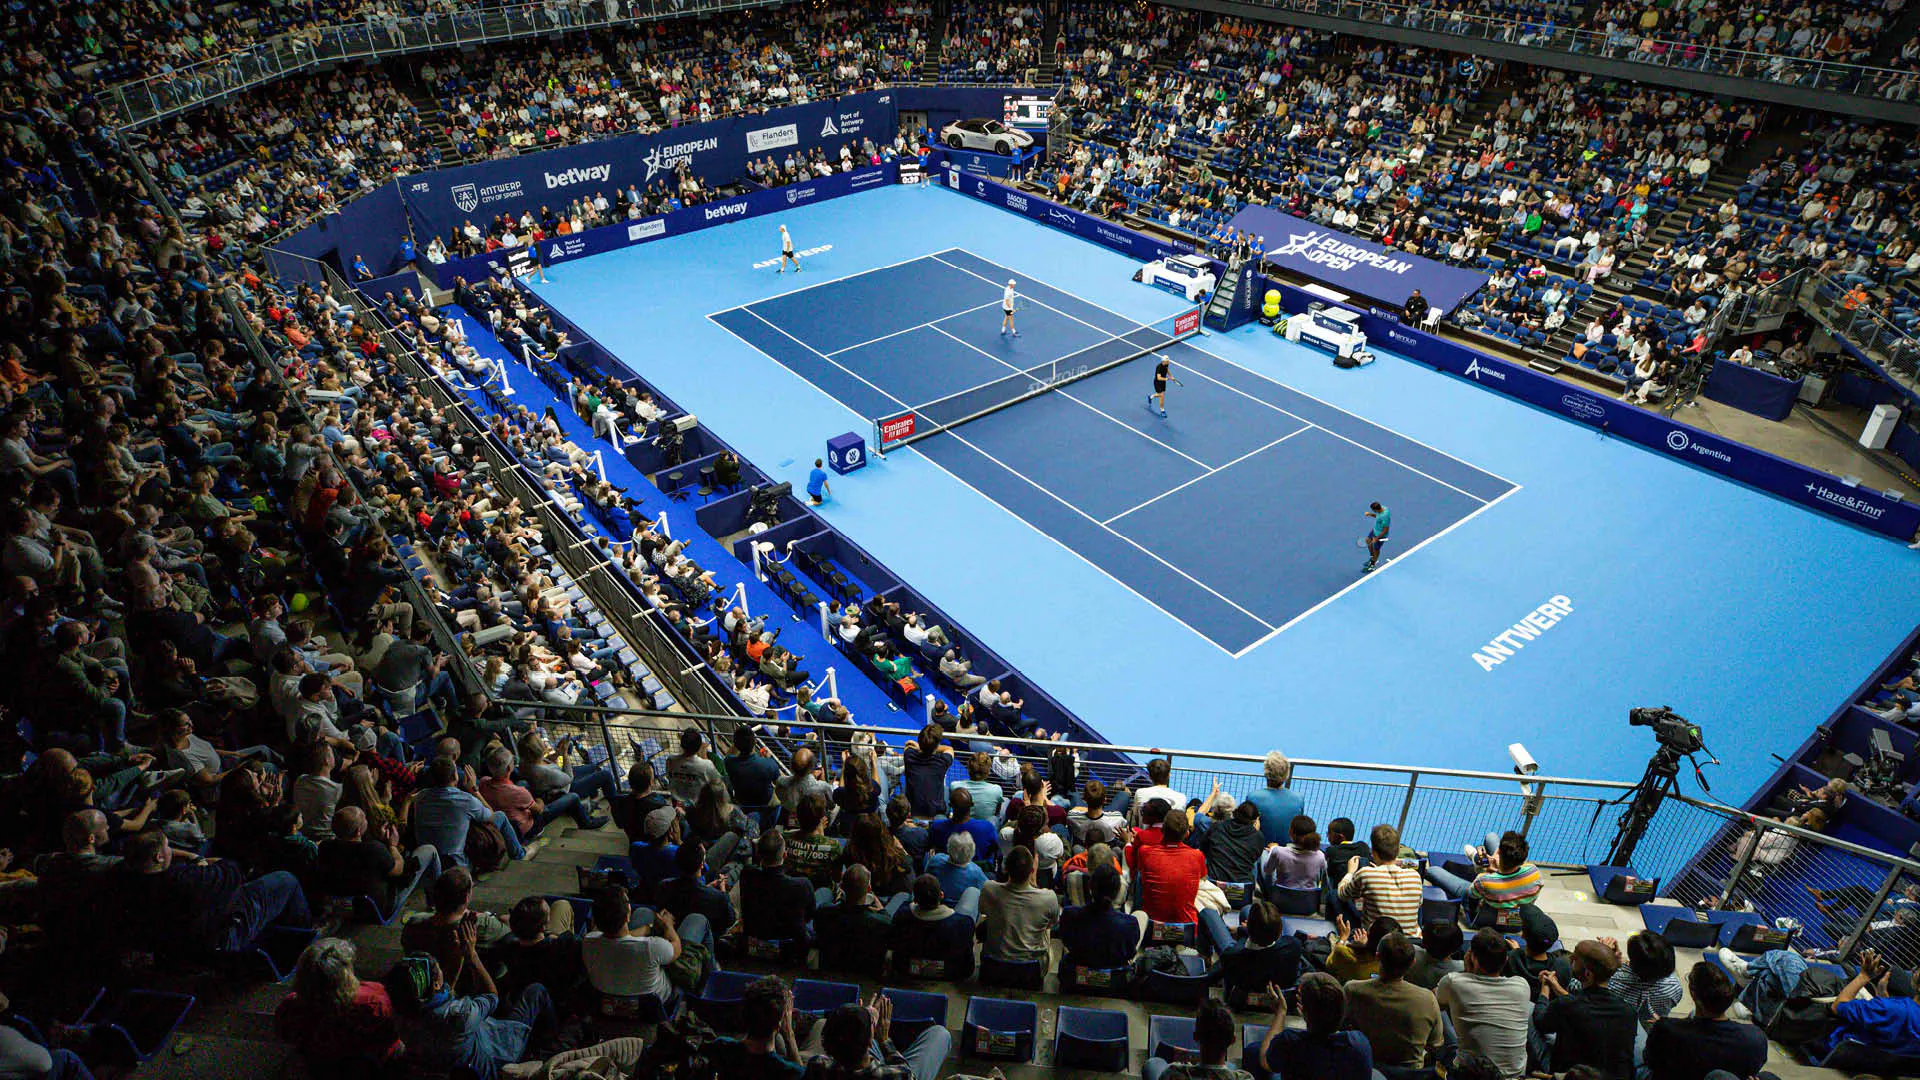 Tennis at the Lotto Arena